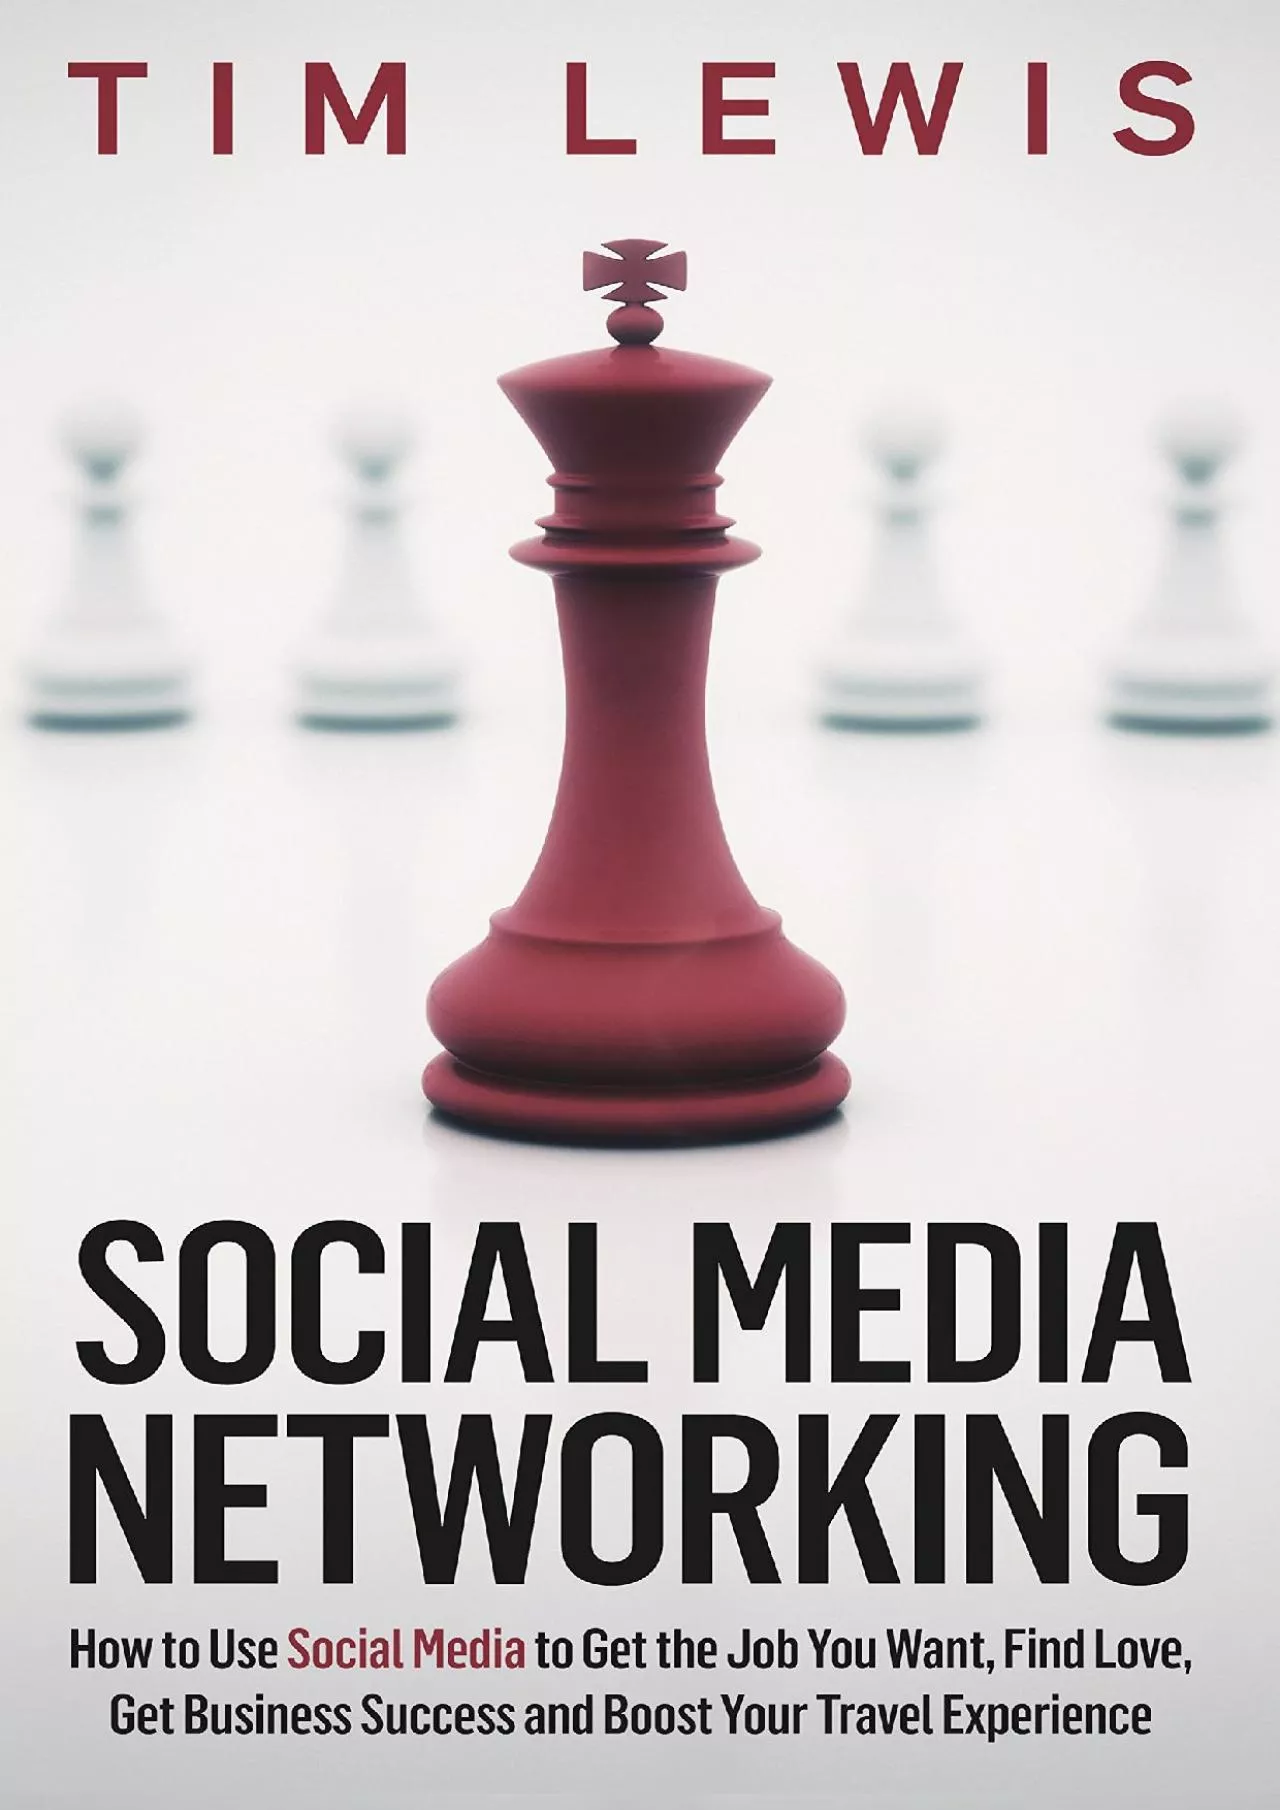 Social Media Networking: How to Use Social Media to Get the Job You Want, Find Love, Get